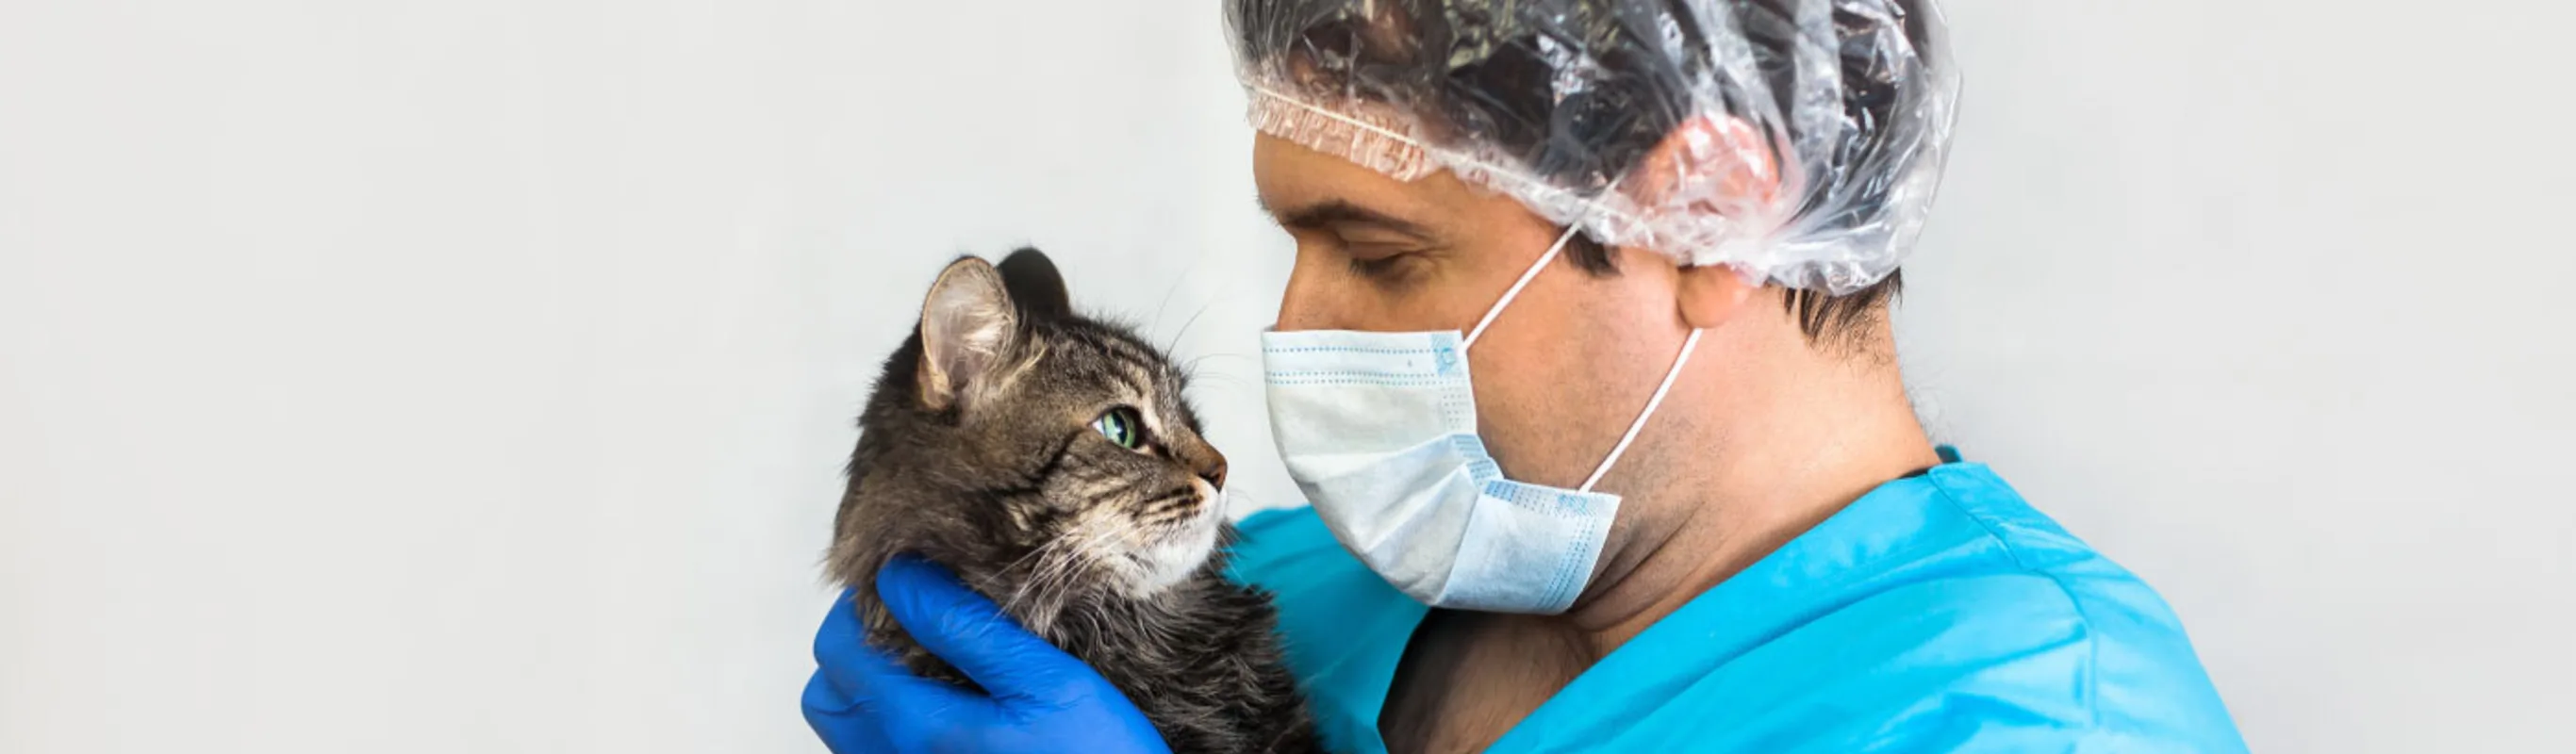 Male staff veterinarian with covid-19 mask is holding a black and grey tabby cat.